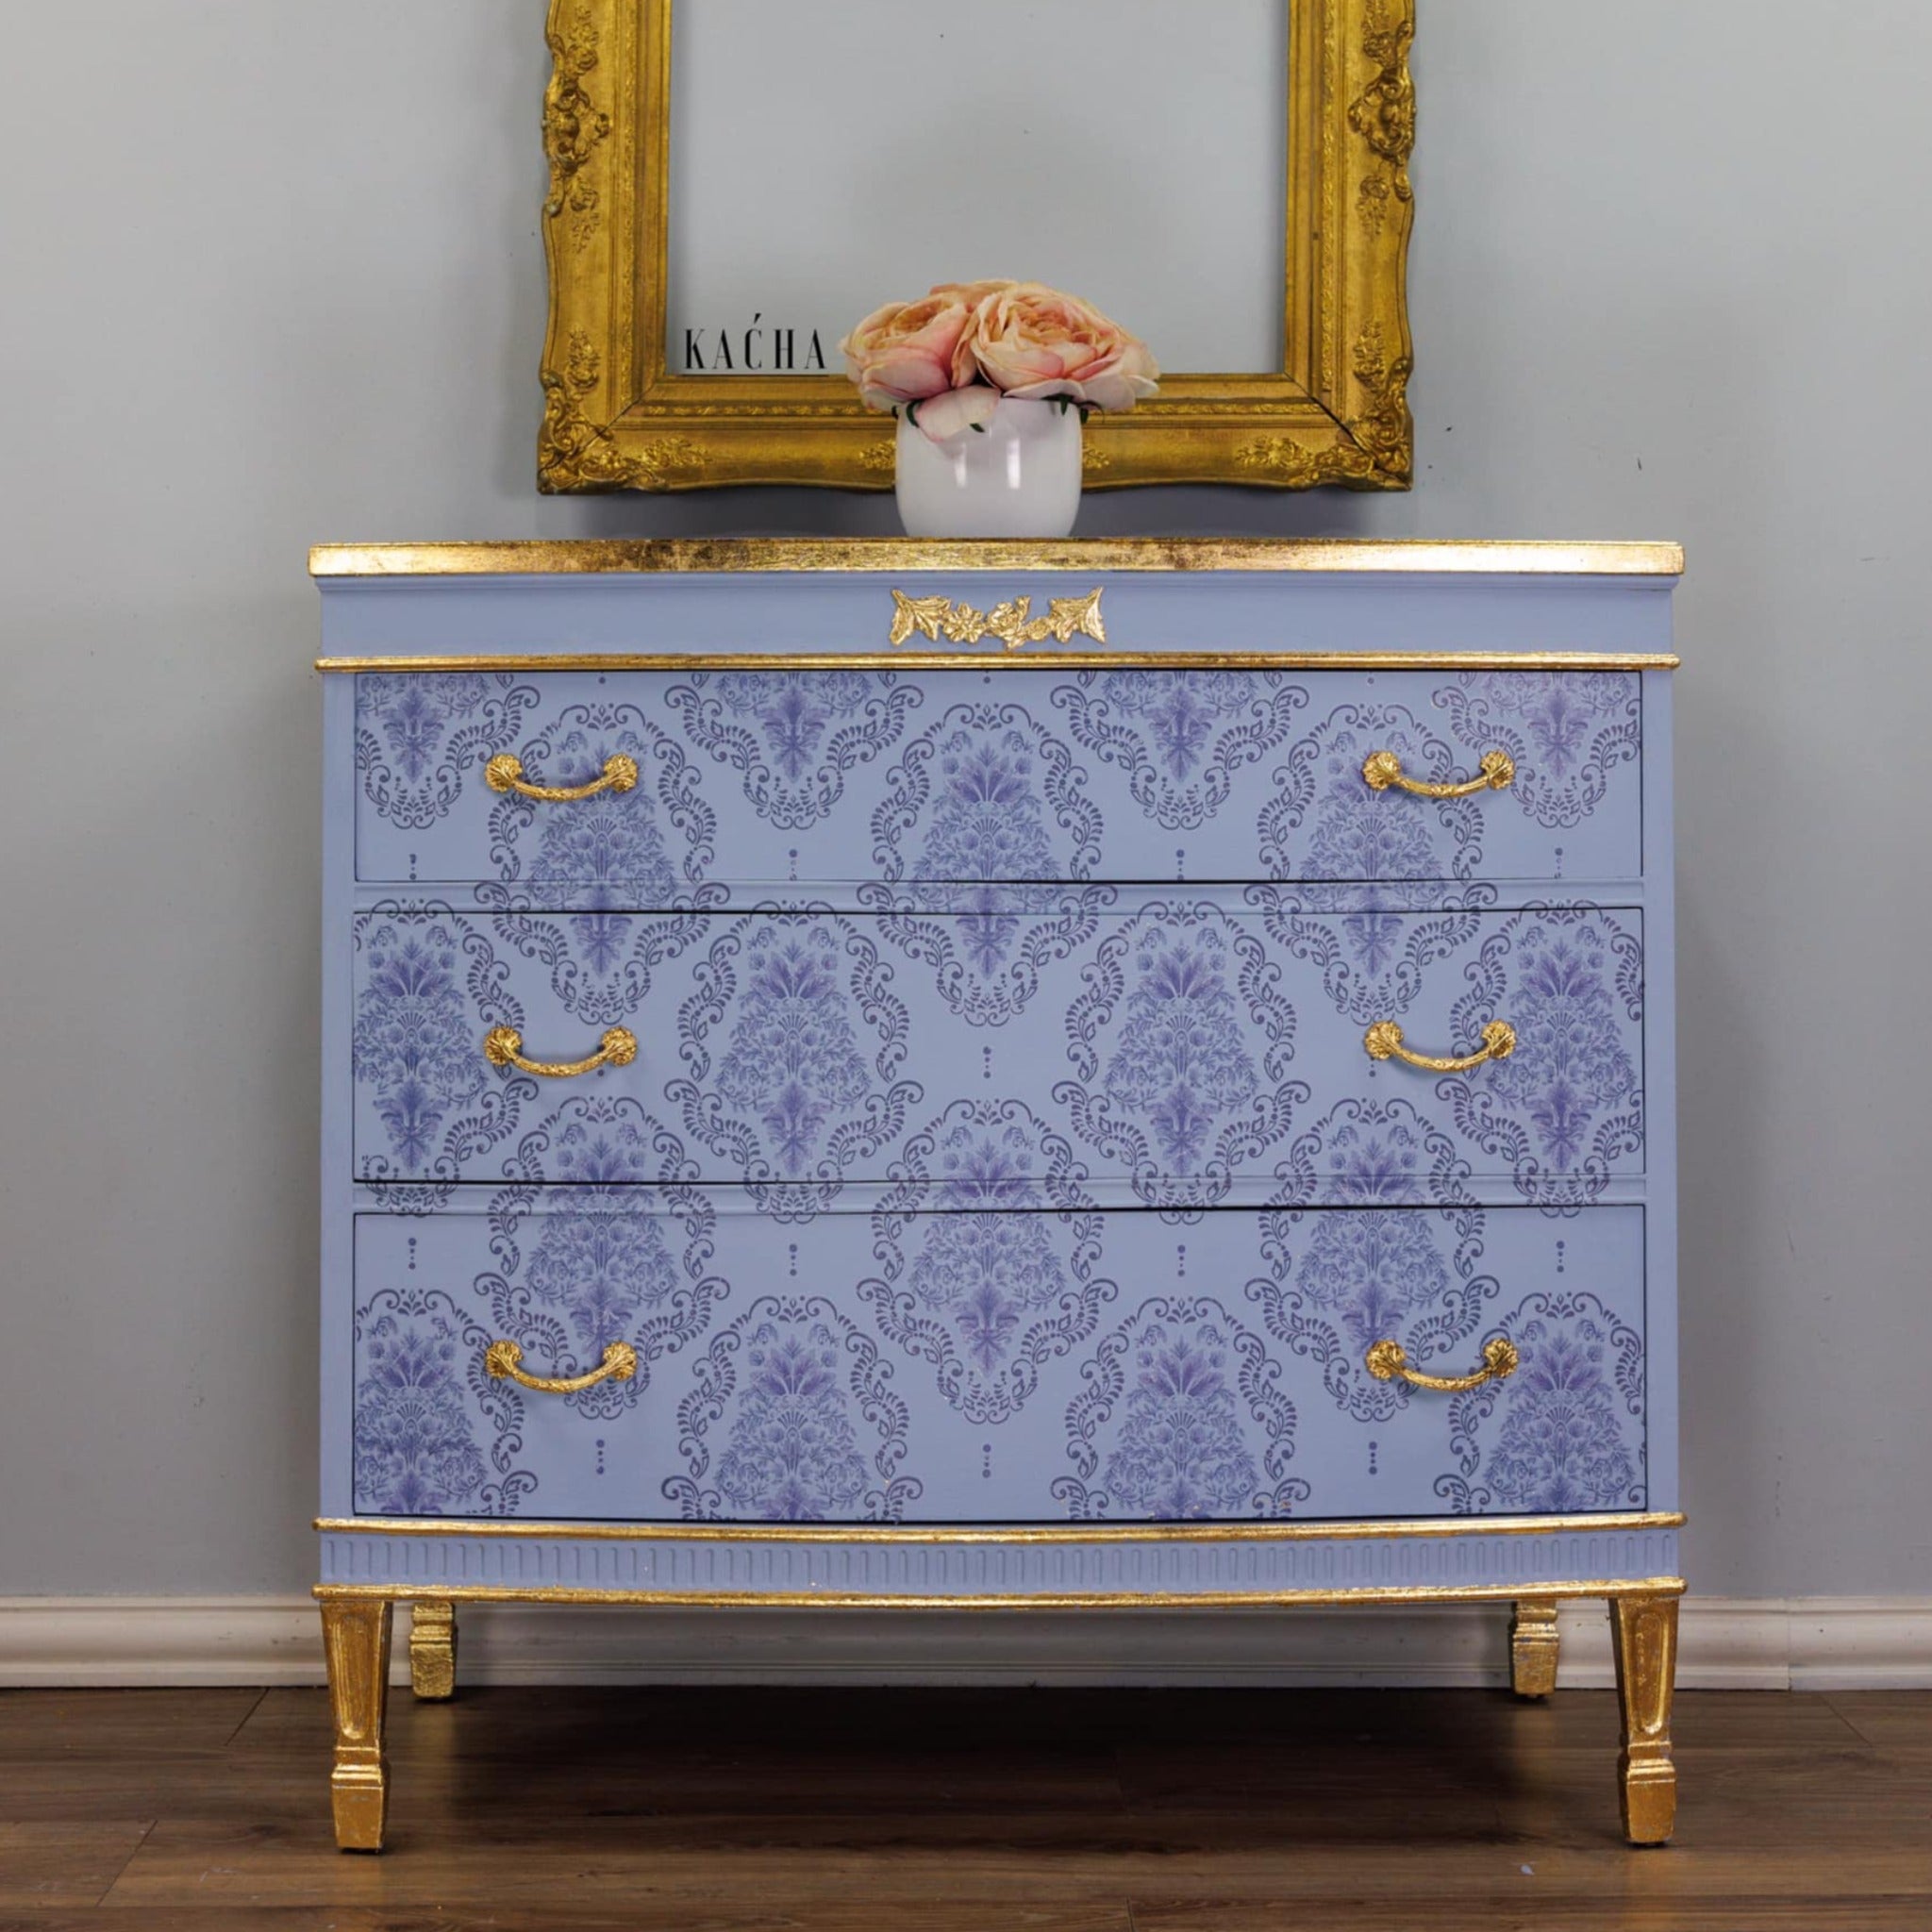 A dresser refurbished by Kacha is painted light blue with gold accents and features the Kacha Dana Damask trasnfer on its drawers.